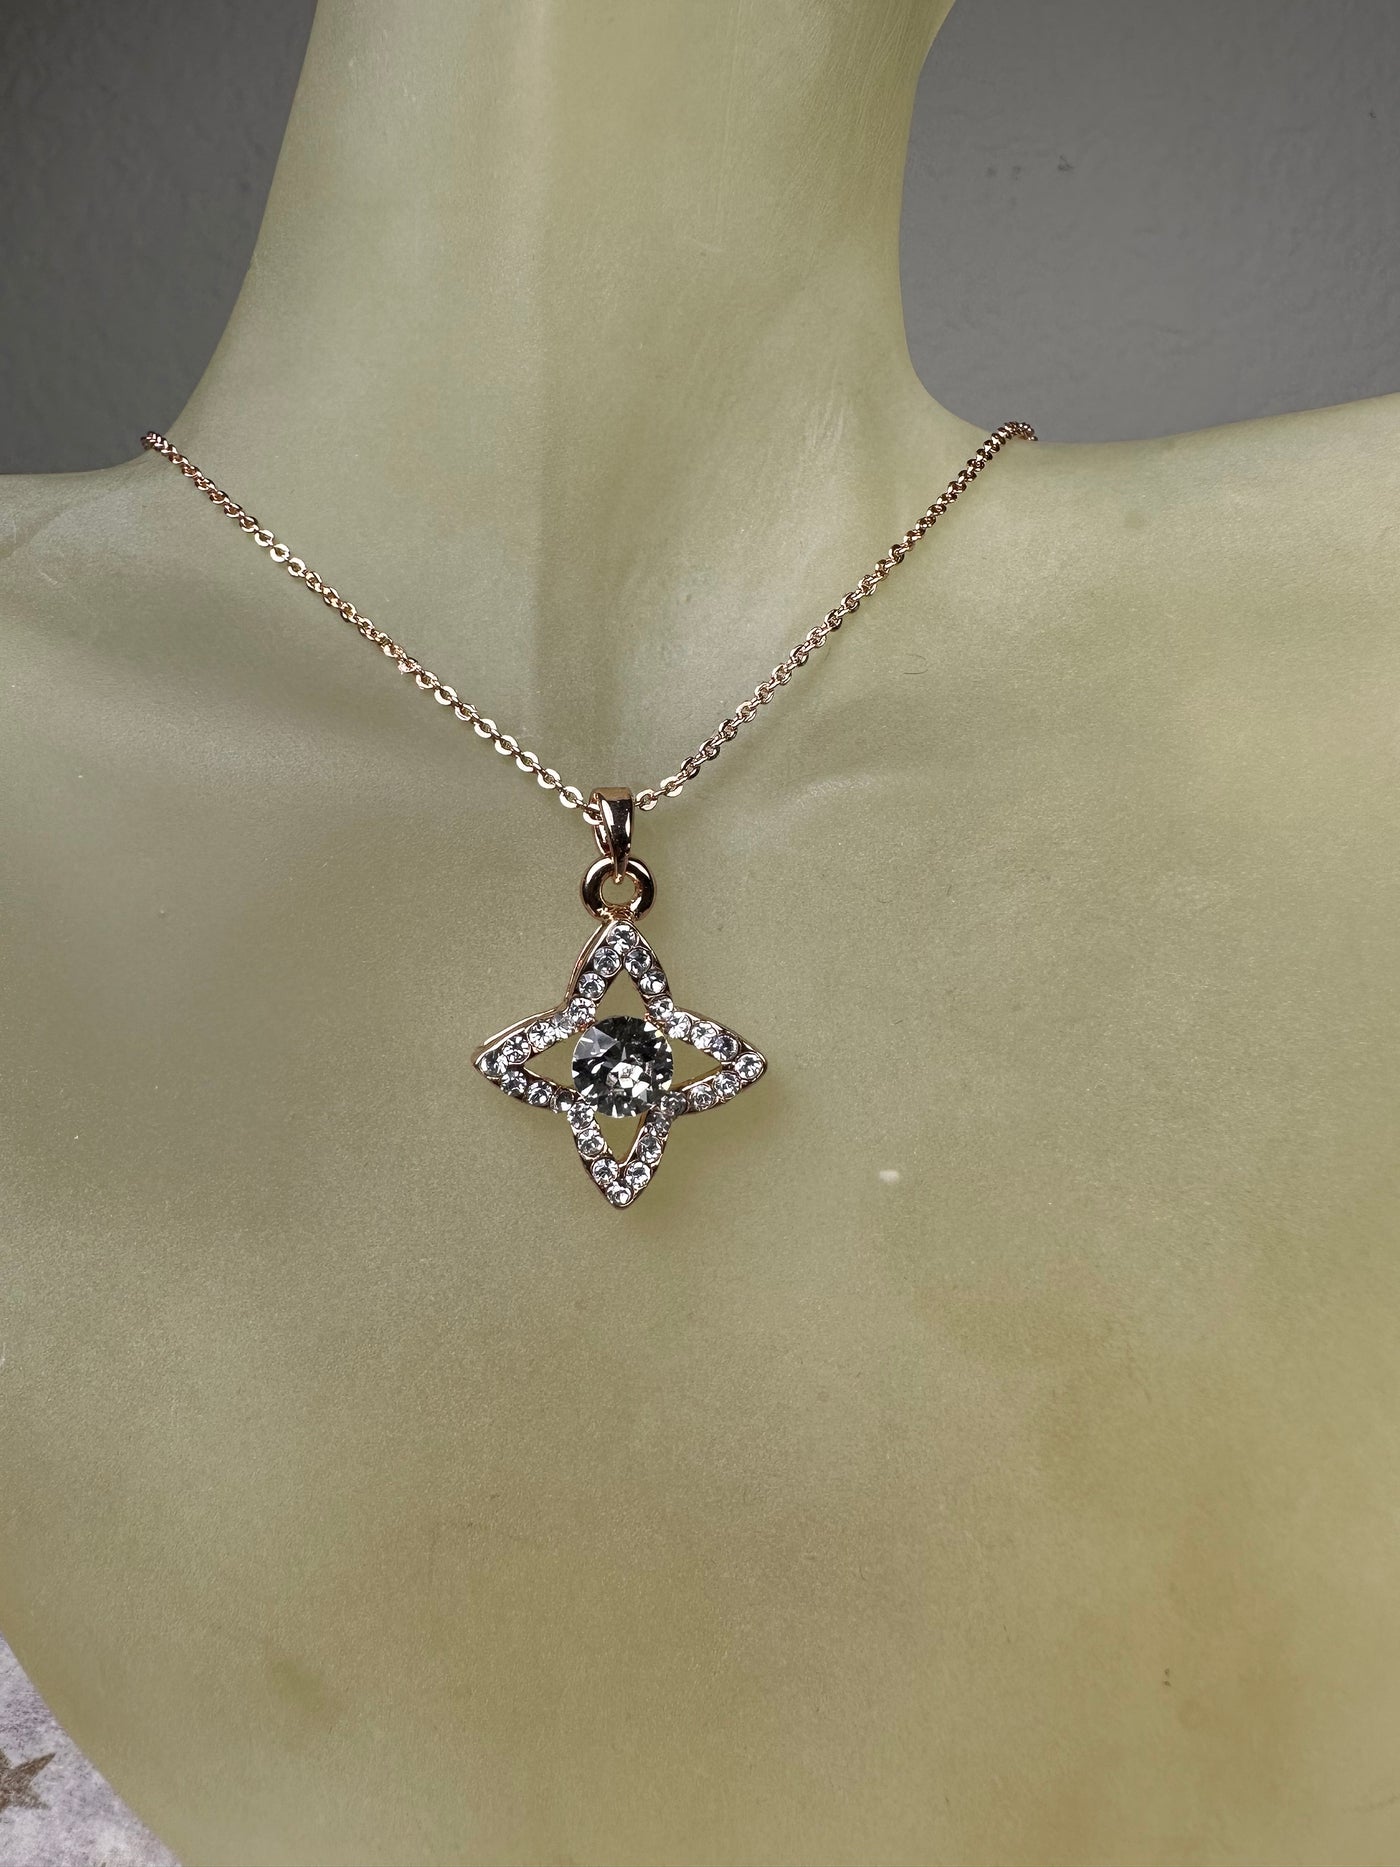 Rose Gold Tone Four Pointed Crystal Pendant Necklace